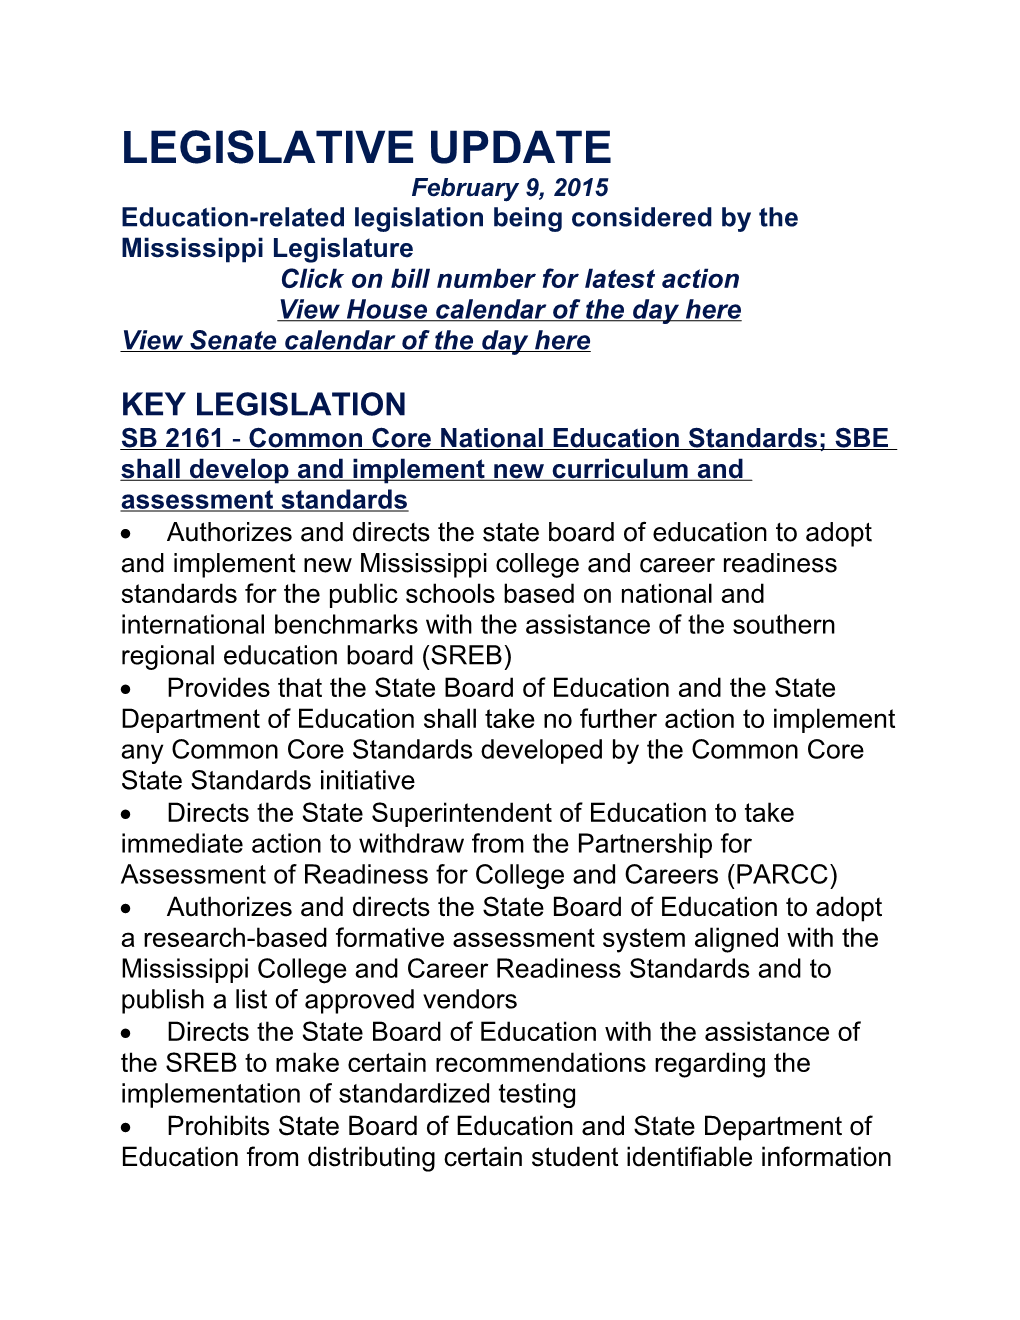 Education-Related Legislation Being Considered by the Mississippi Legislature